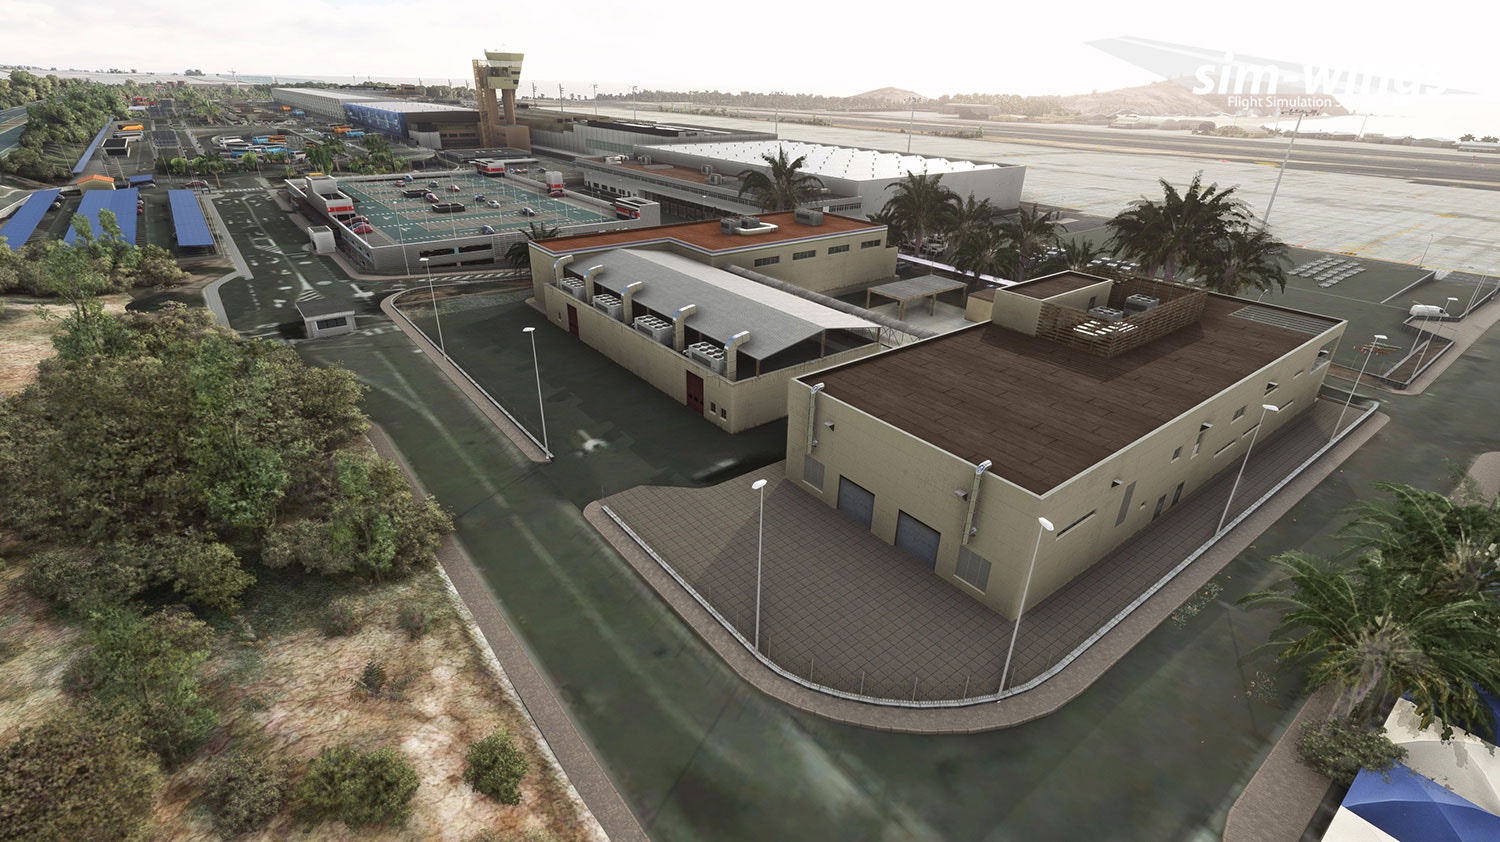 Sim-Wings Gran Canaria for MSFS Released